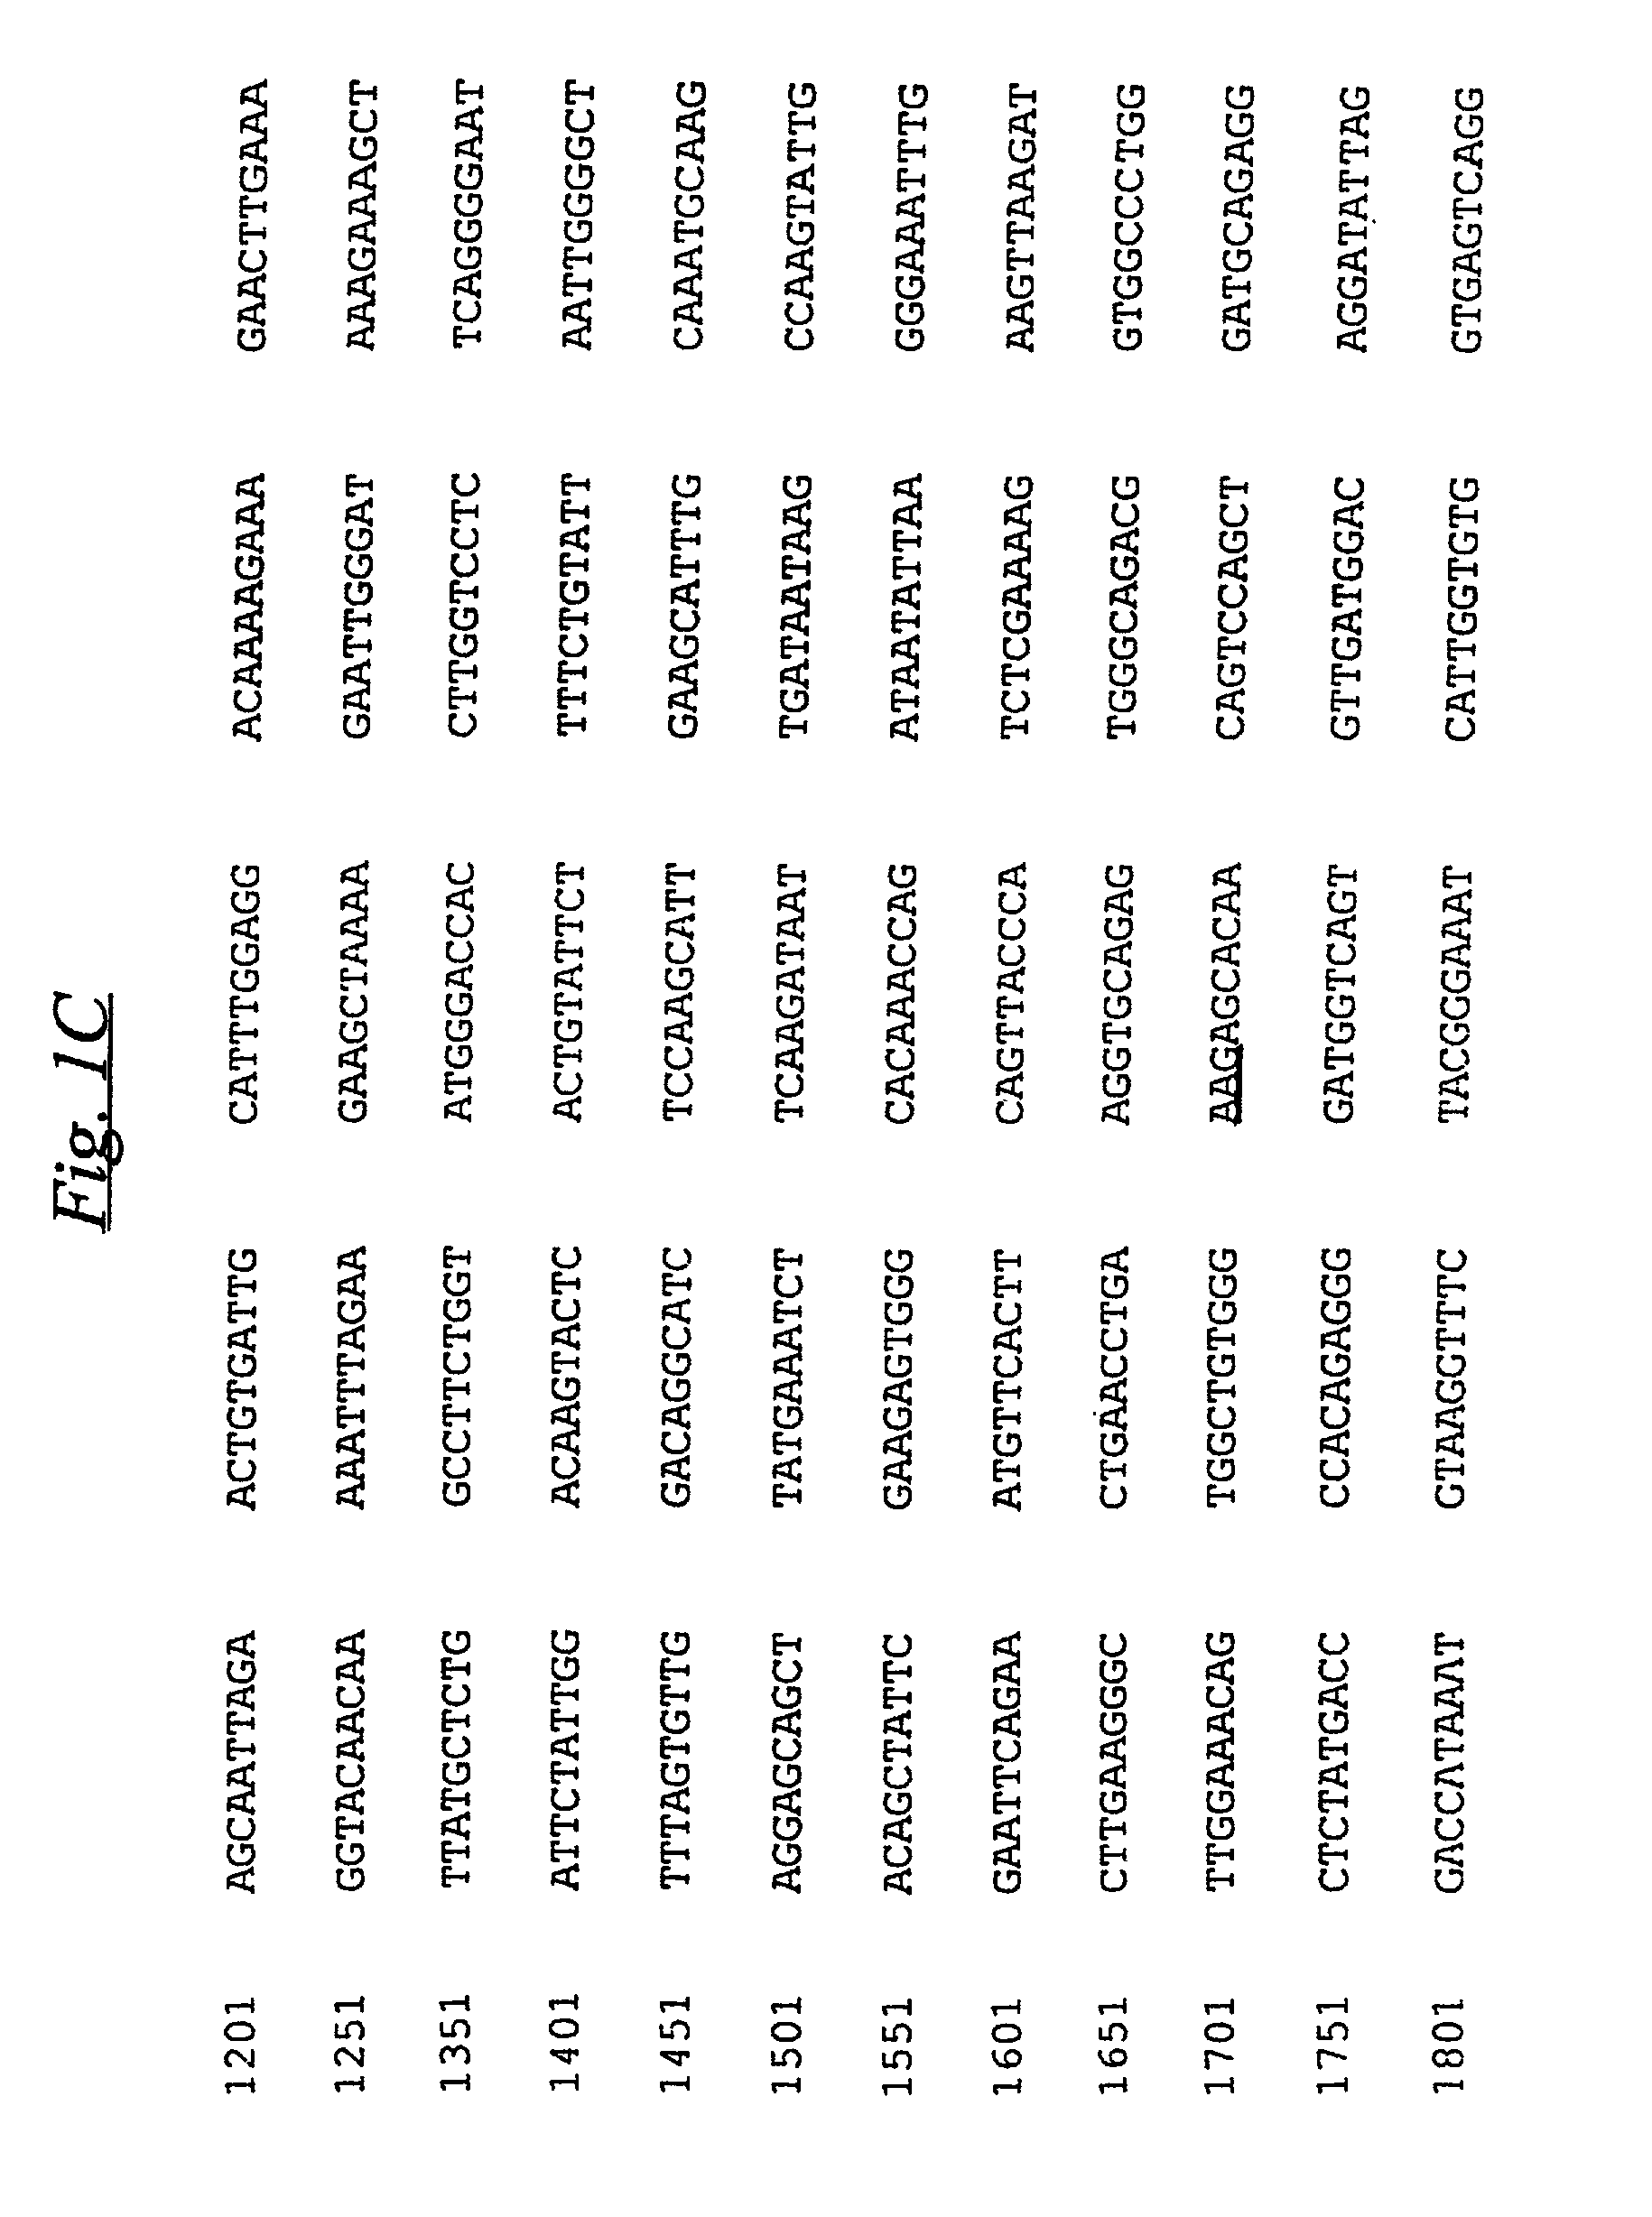 Methods and reagents for preparing and using immunological agents specific for P-glycoprotein